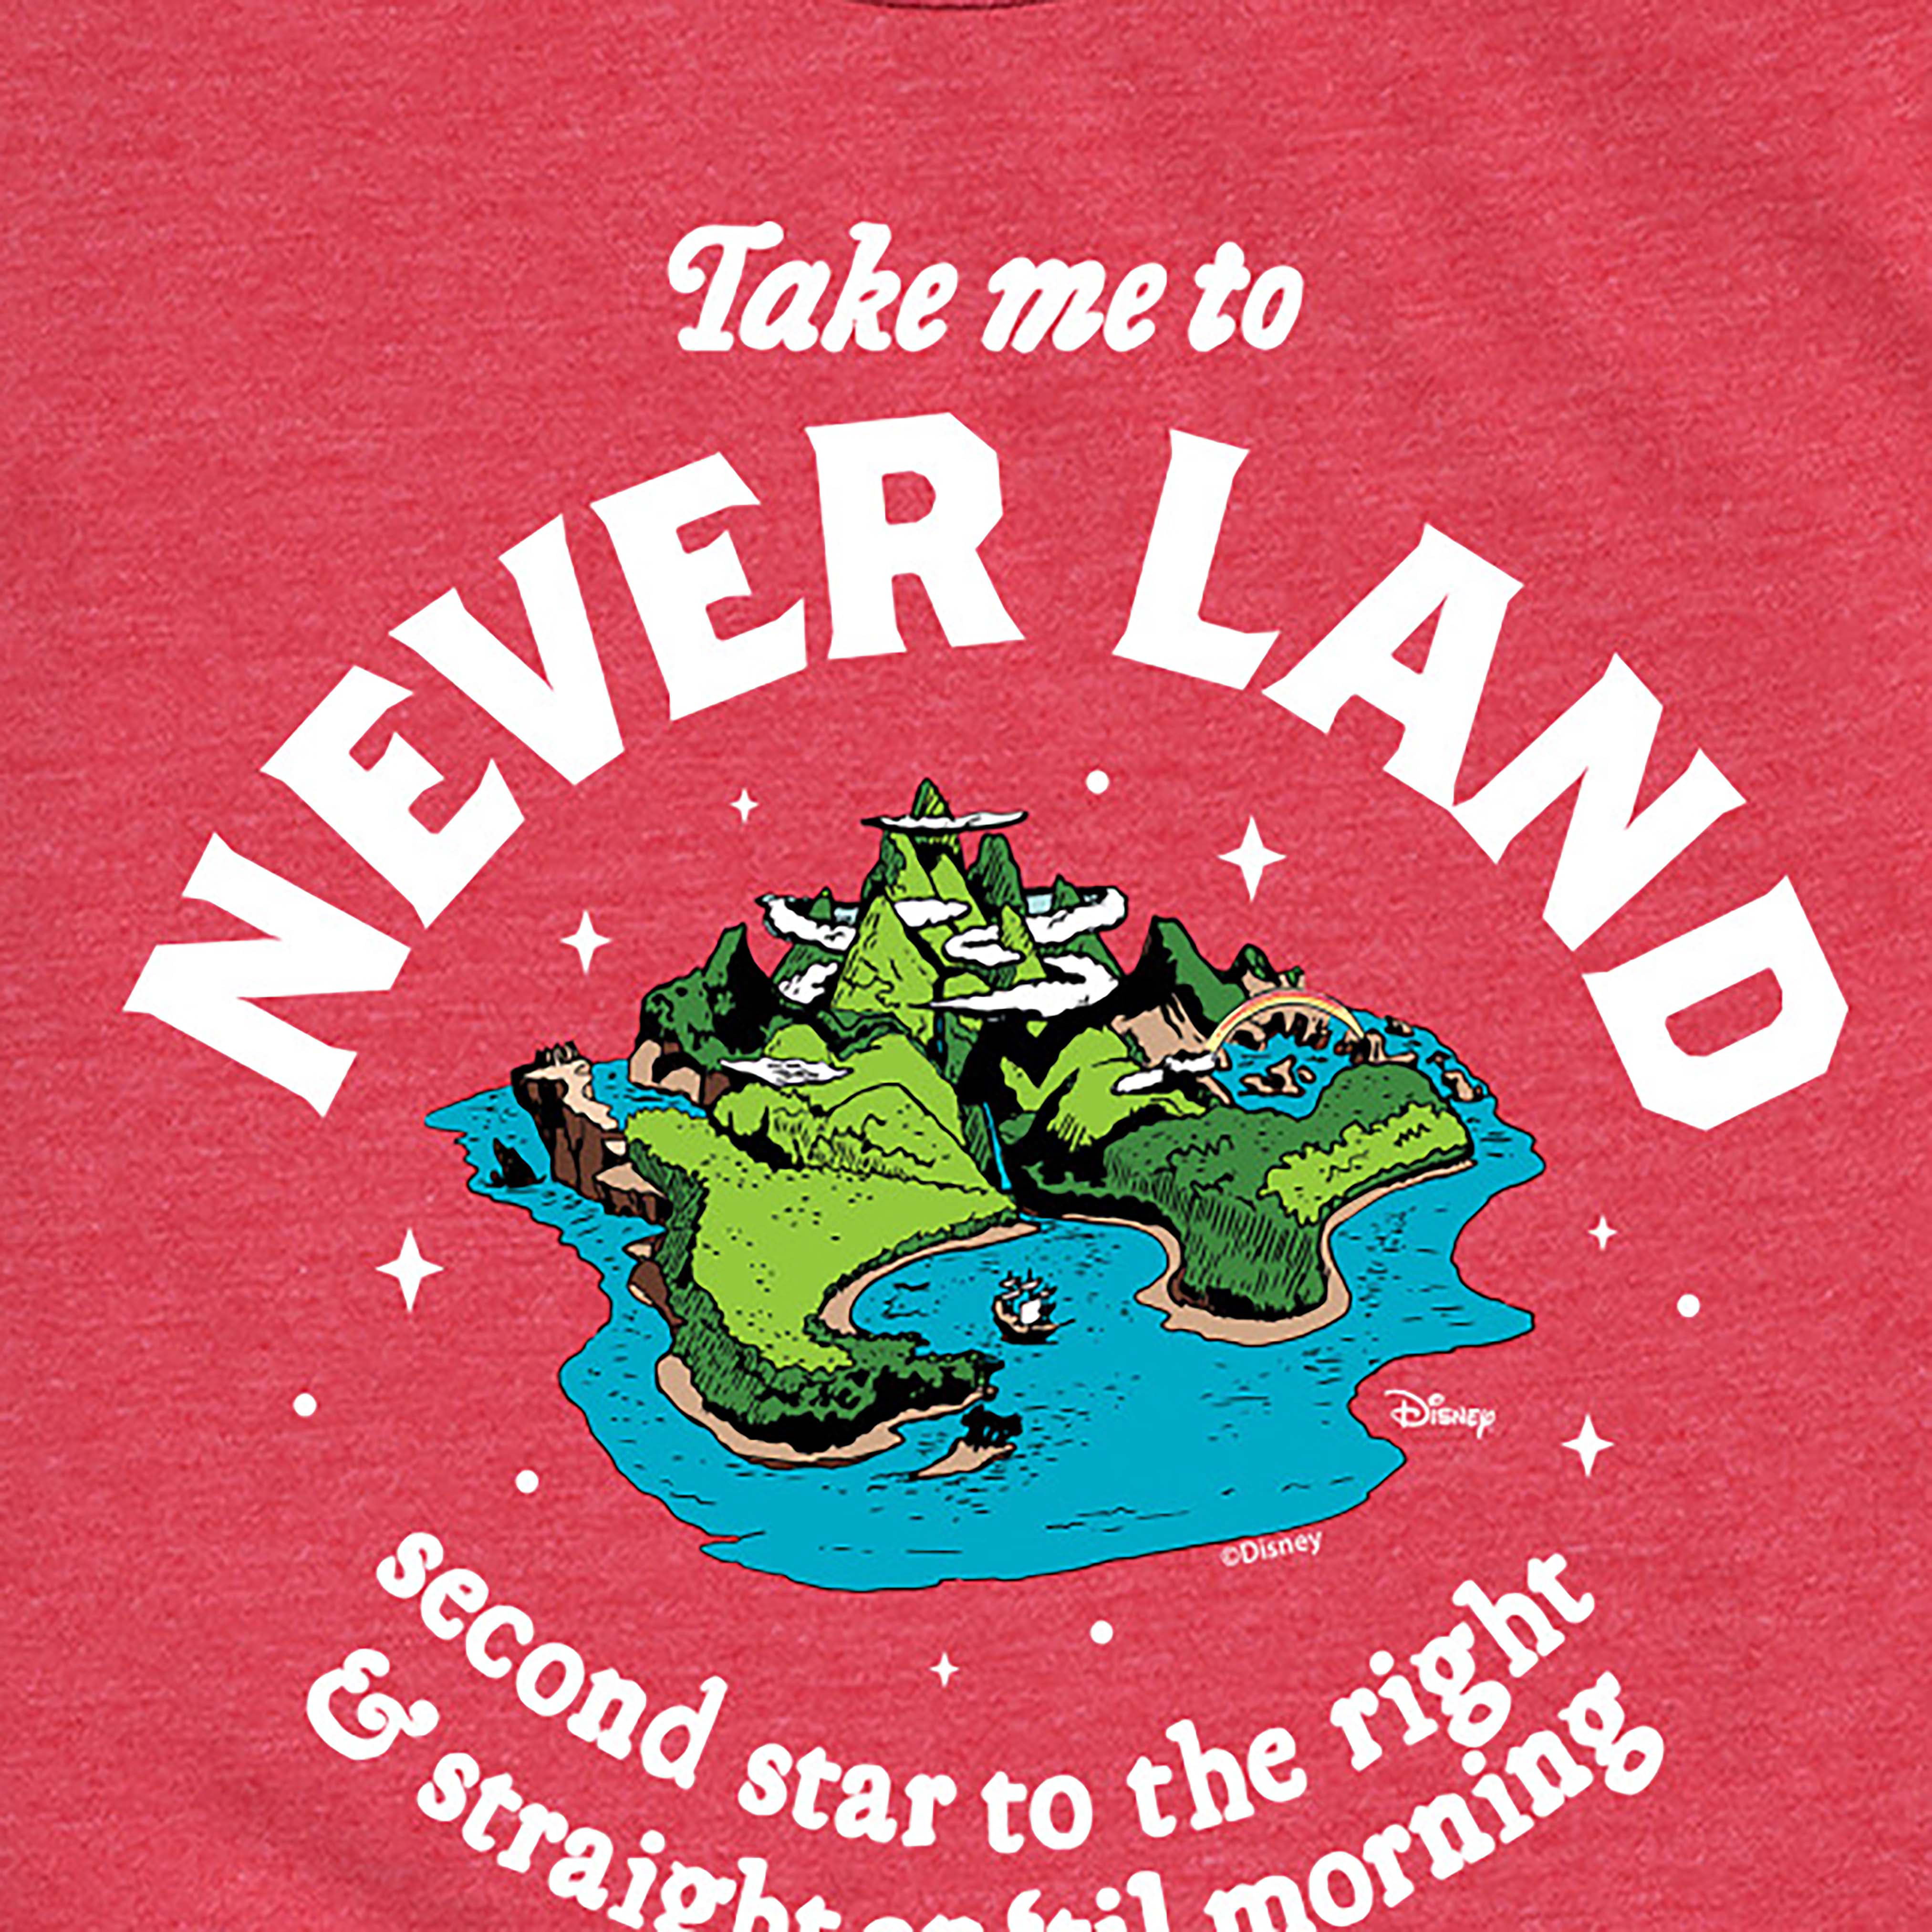 Disney - Peter Pan - Take Me to Neverland - Second Star to the Right -  Toddler And Youth Short Sleeve Graphic T-Shirt